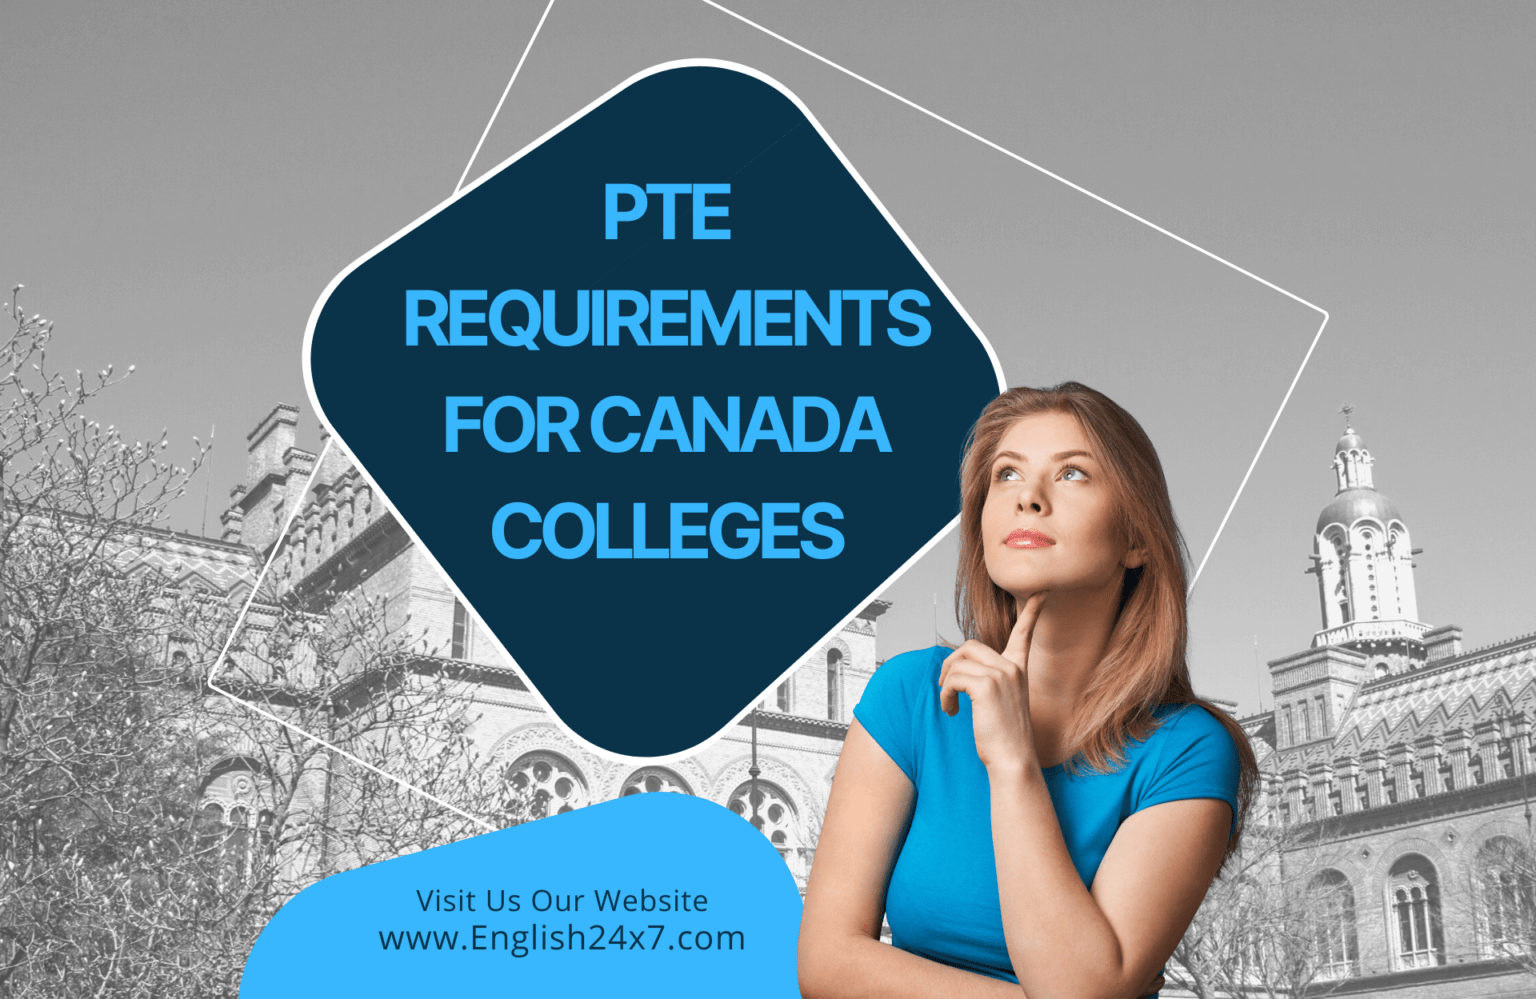 What is the PTE requirement for Canada Colleges